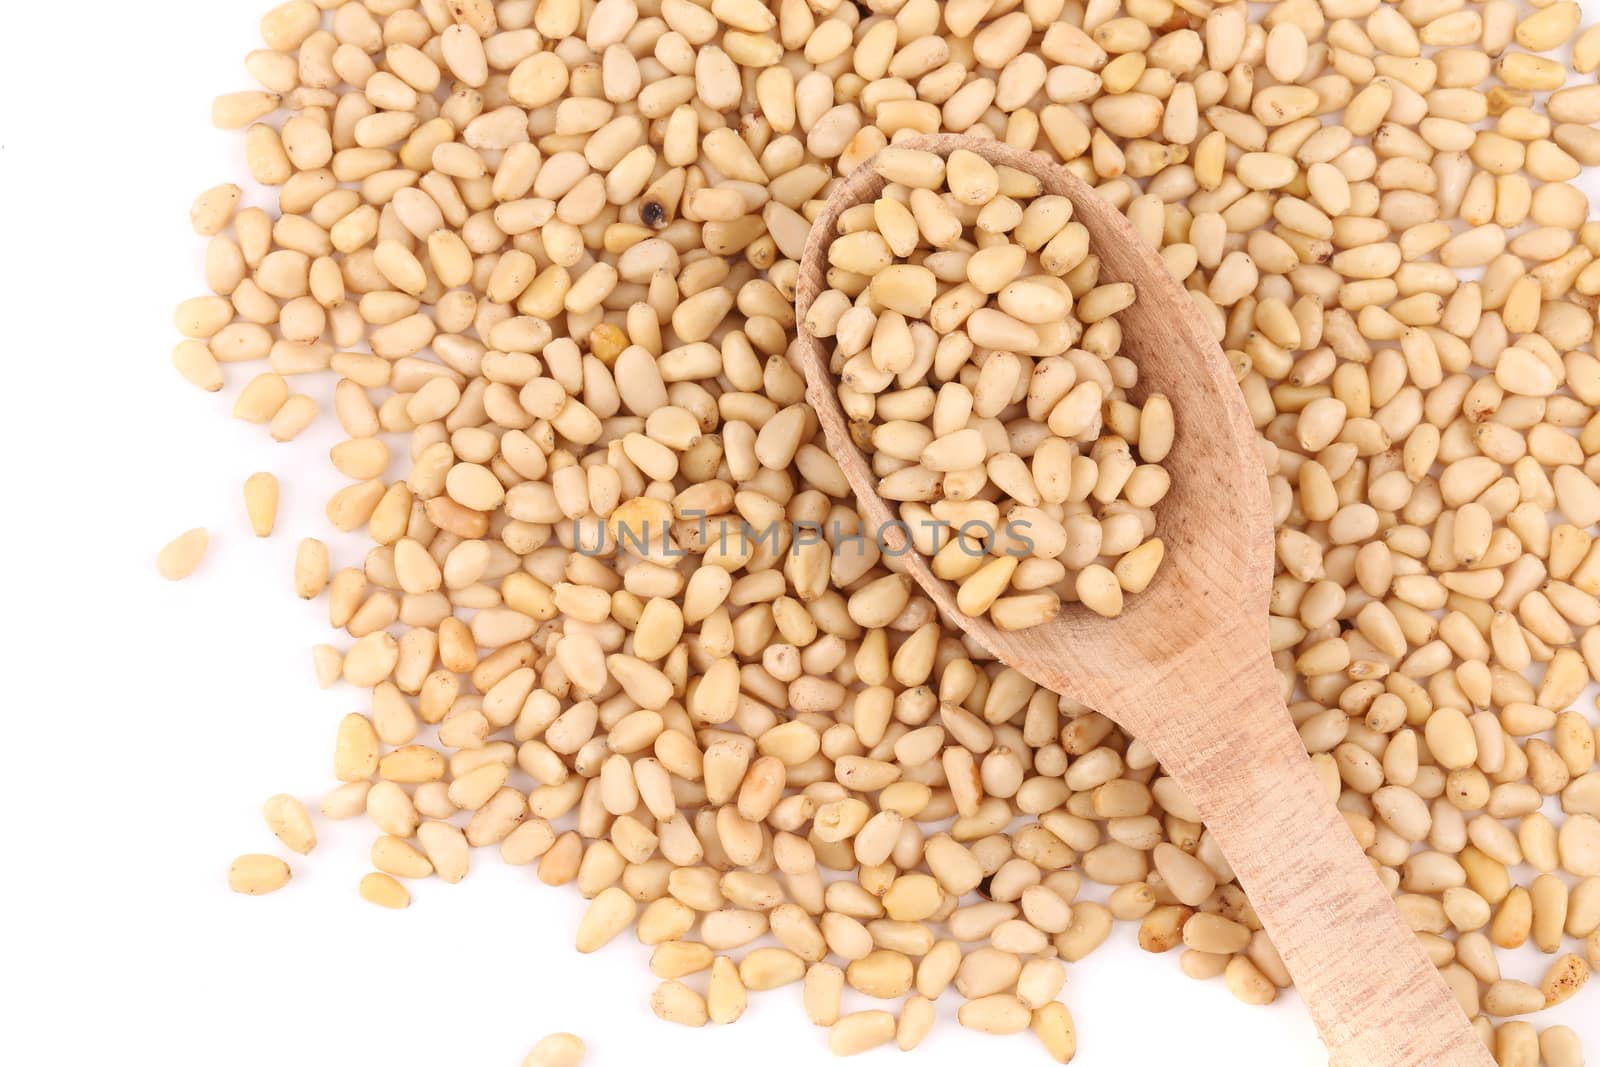 Bunch of pine nuts with wooden spoon. Whole background.